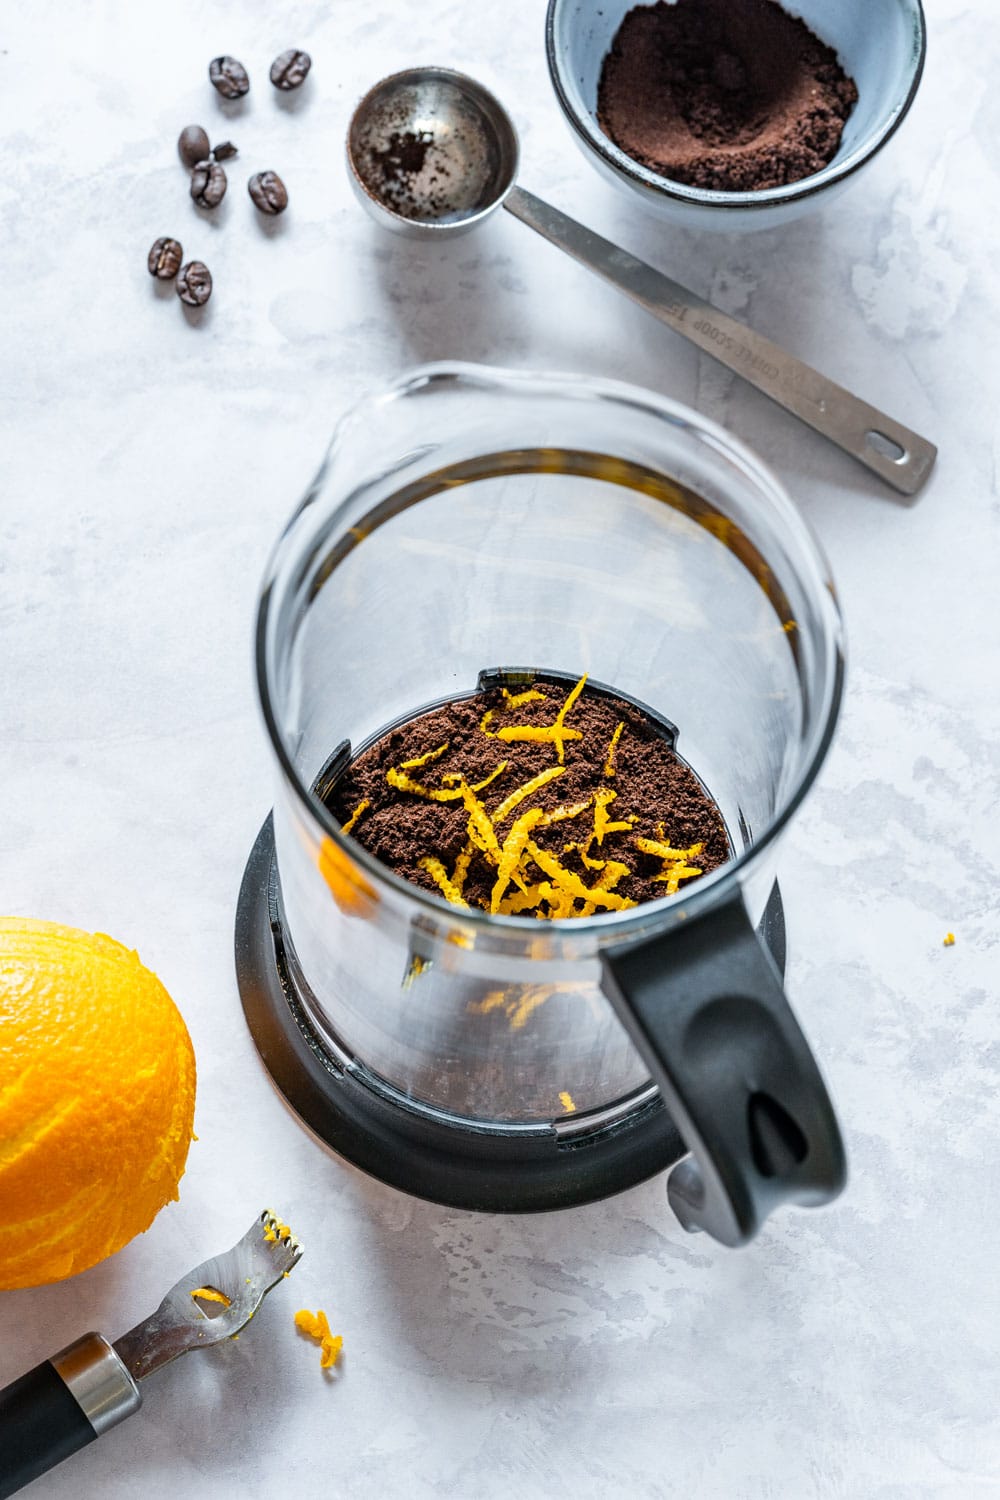 Orange zest and coffee in the French press.